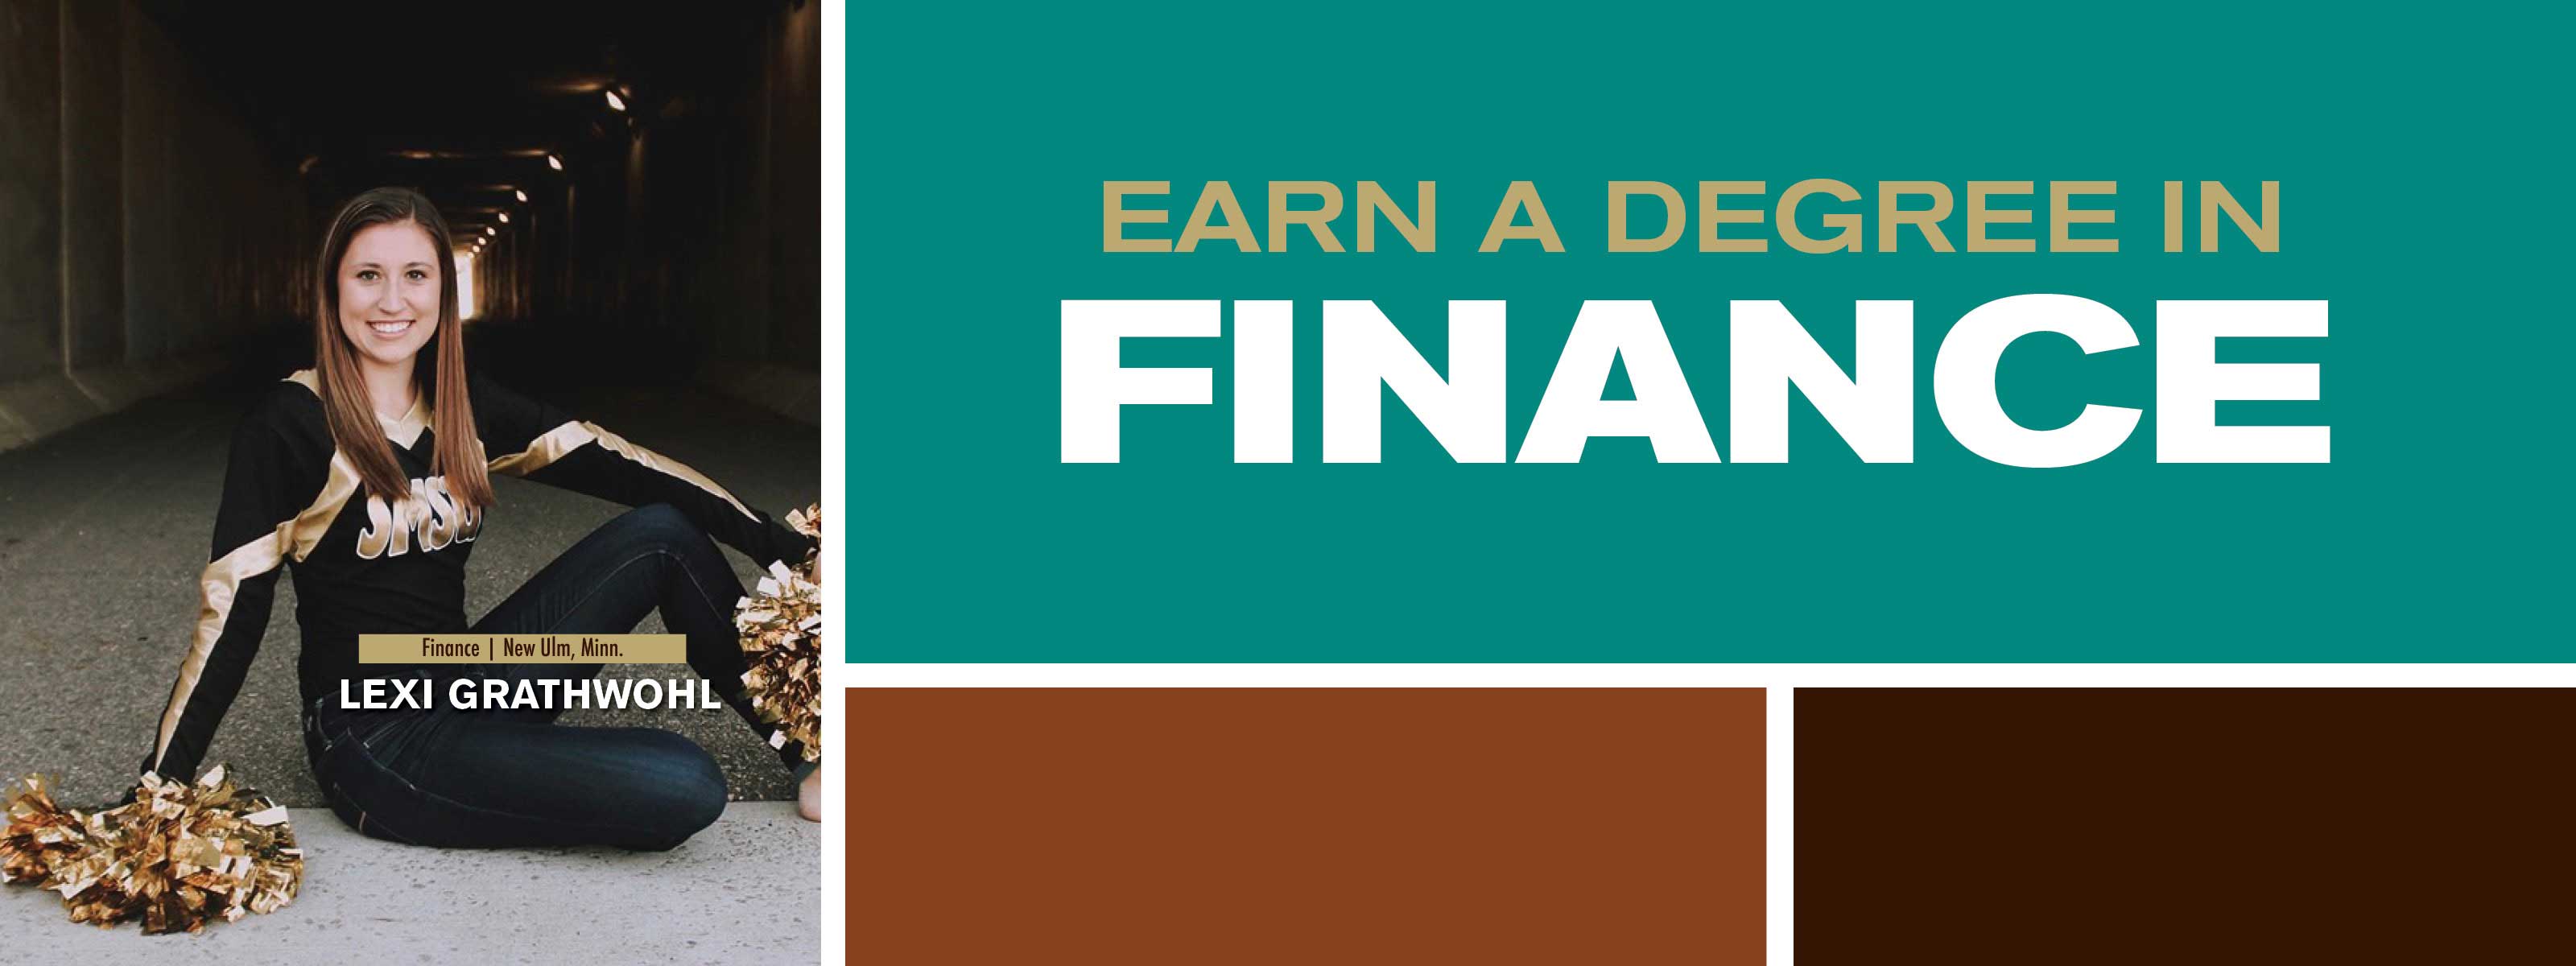 Earn A Degree In Finance - Discover. Engage. Lead.